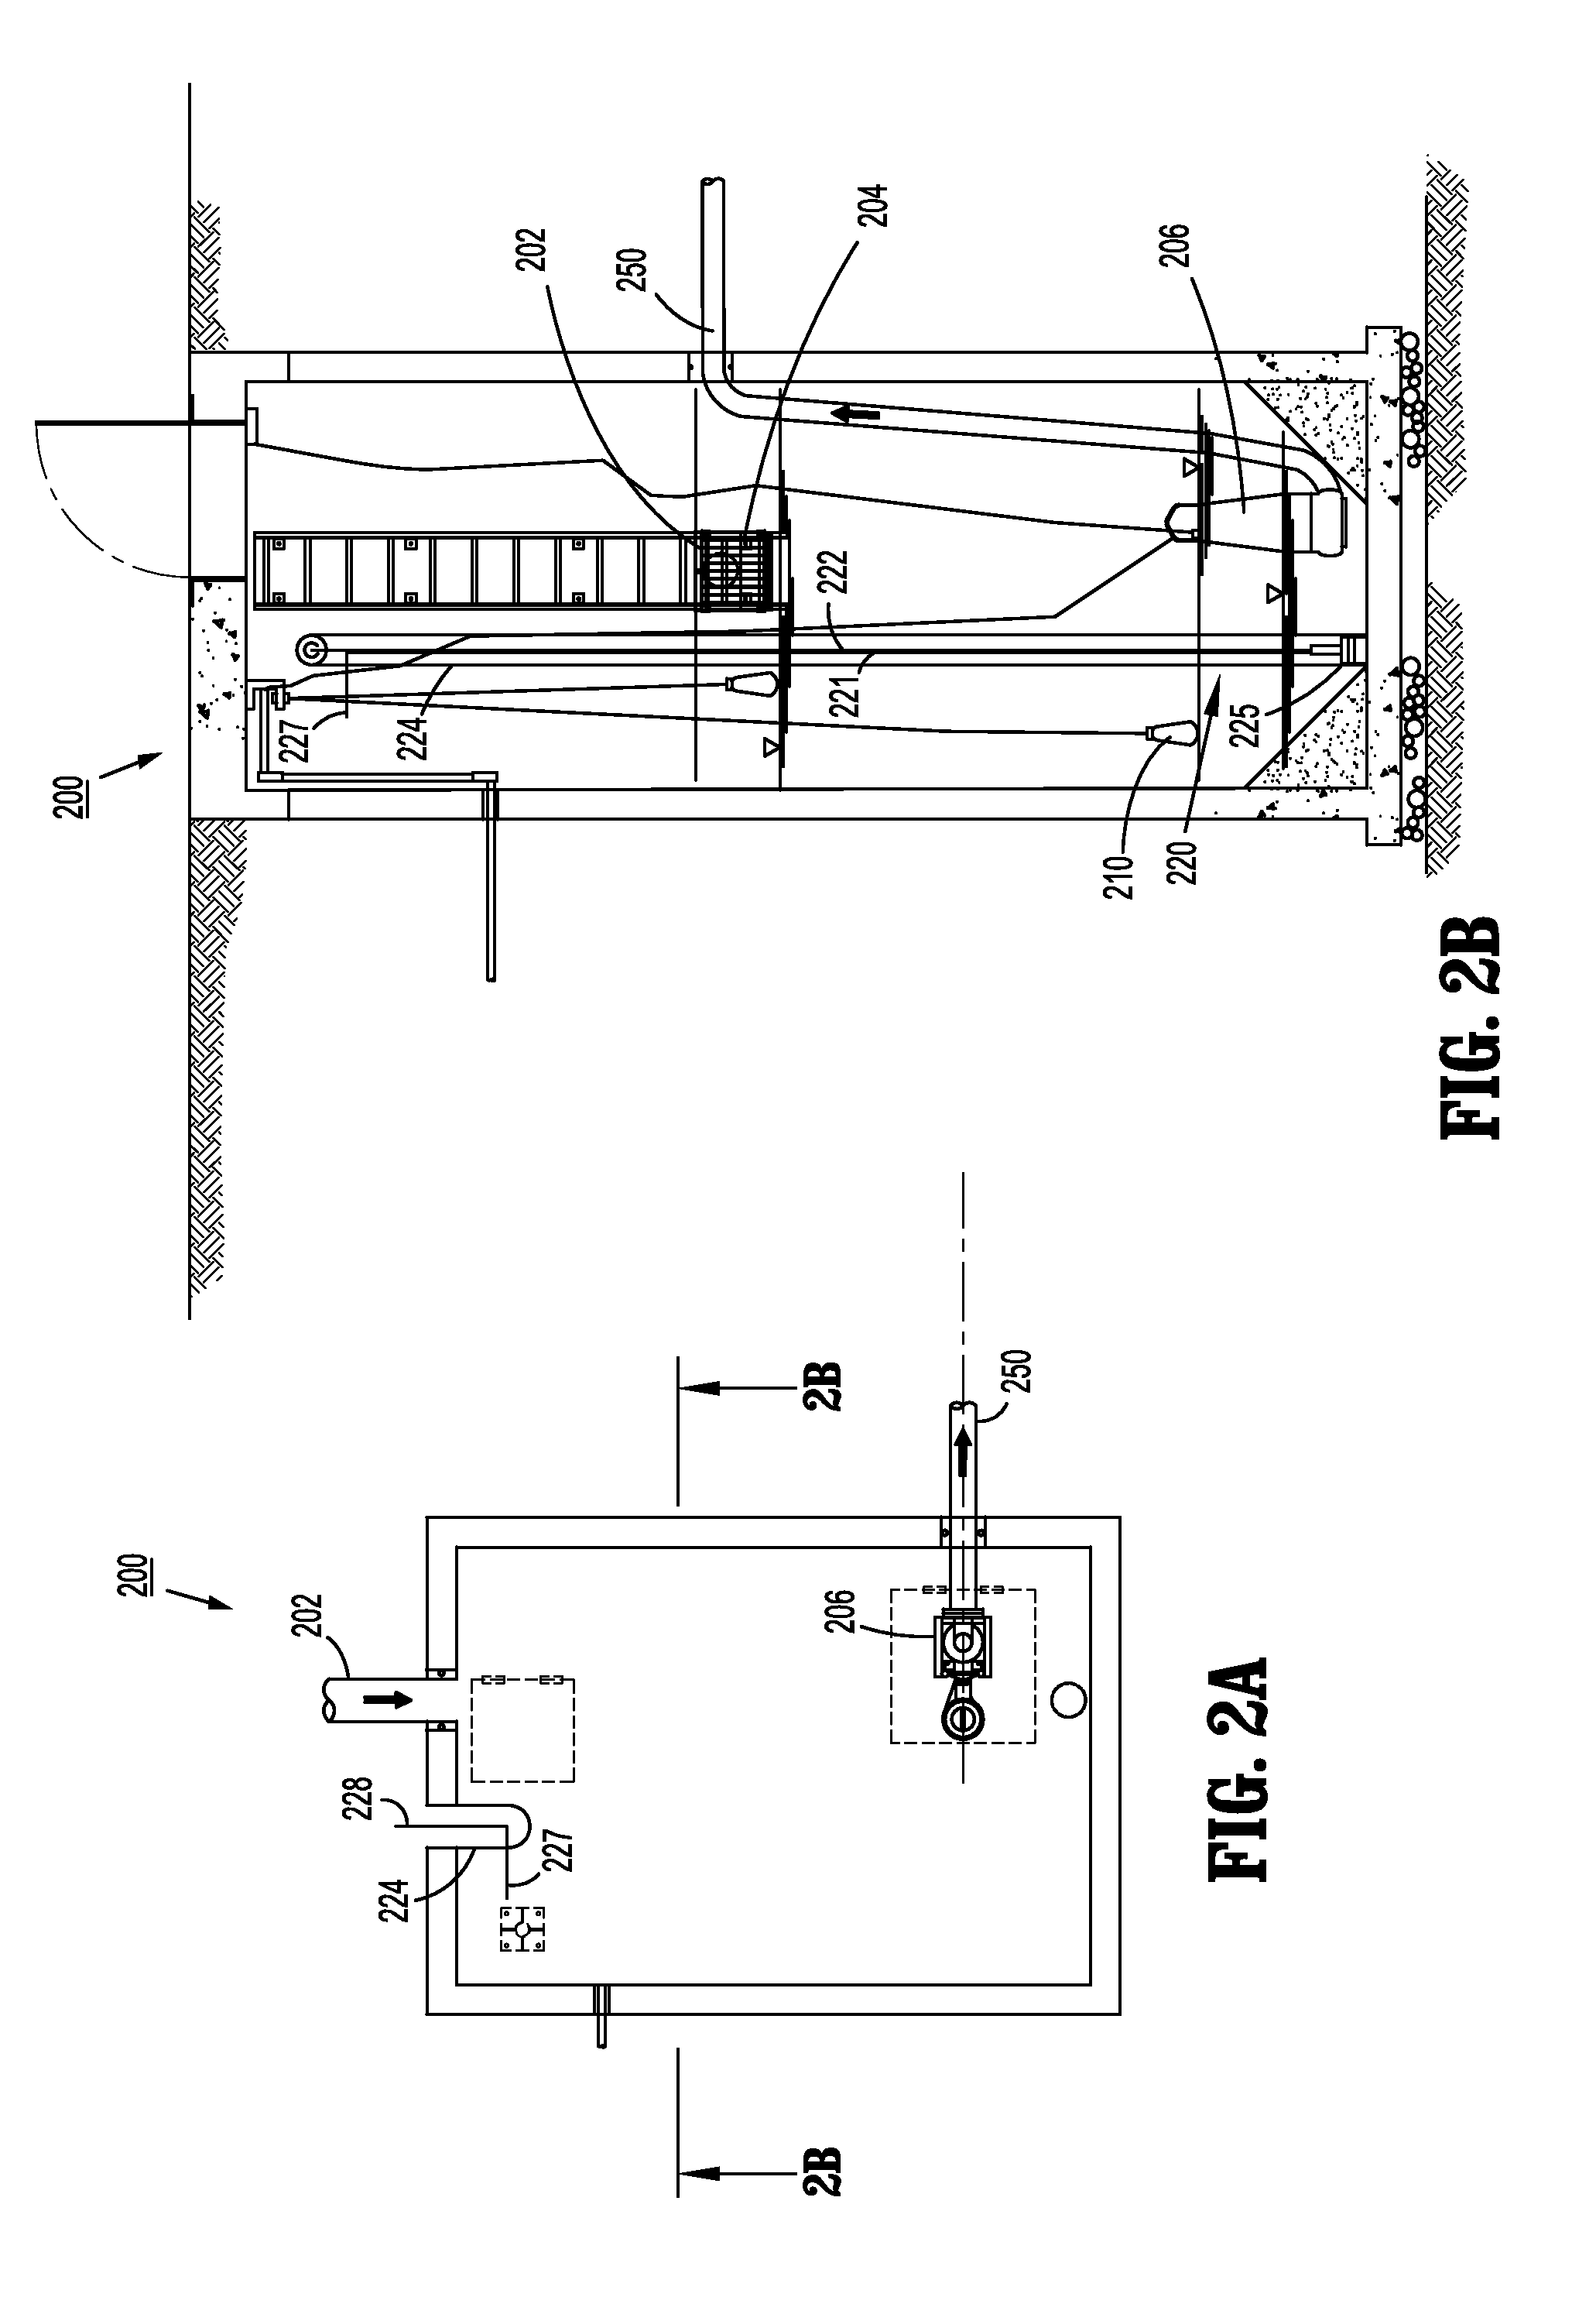 Systems and methods for anaerobic digestion of biomaterials